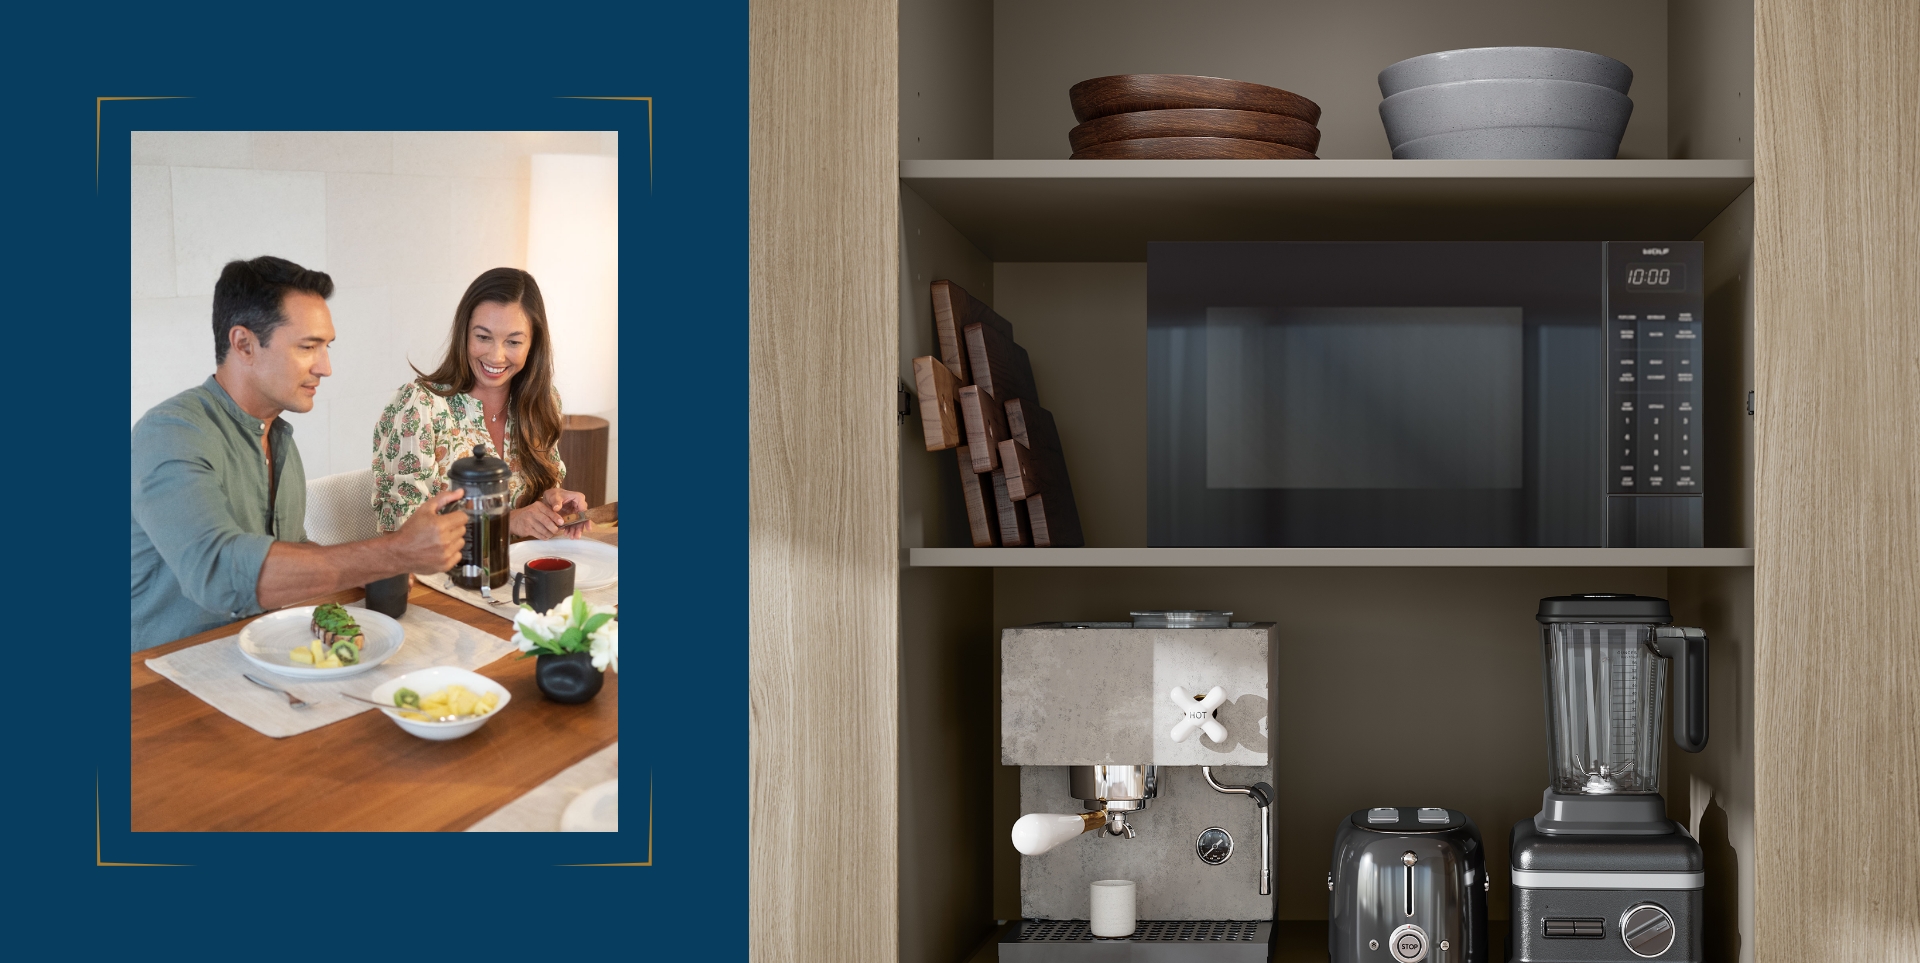 A man and a woman enjoying breakfast and coffee. Kalae Appliance Garage in Light Color Scheme with cabinetry showcasing dishware, microwave, espresso machine, toaster, and blender.